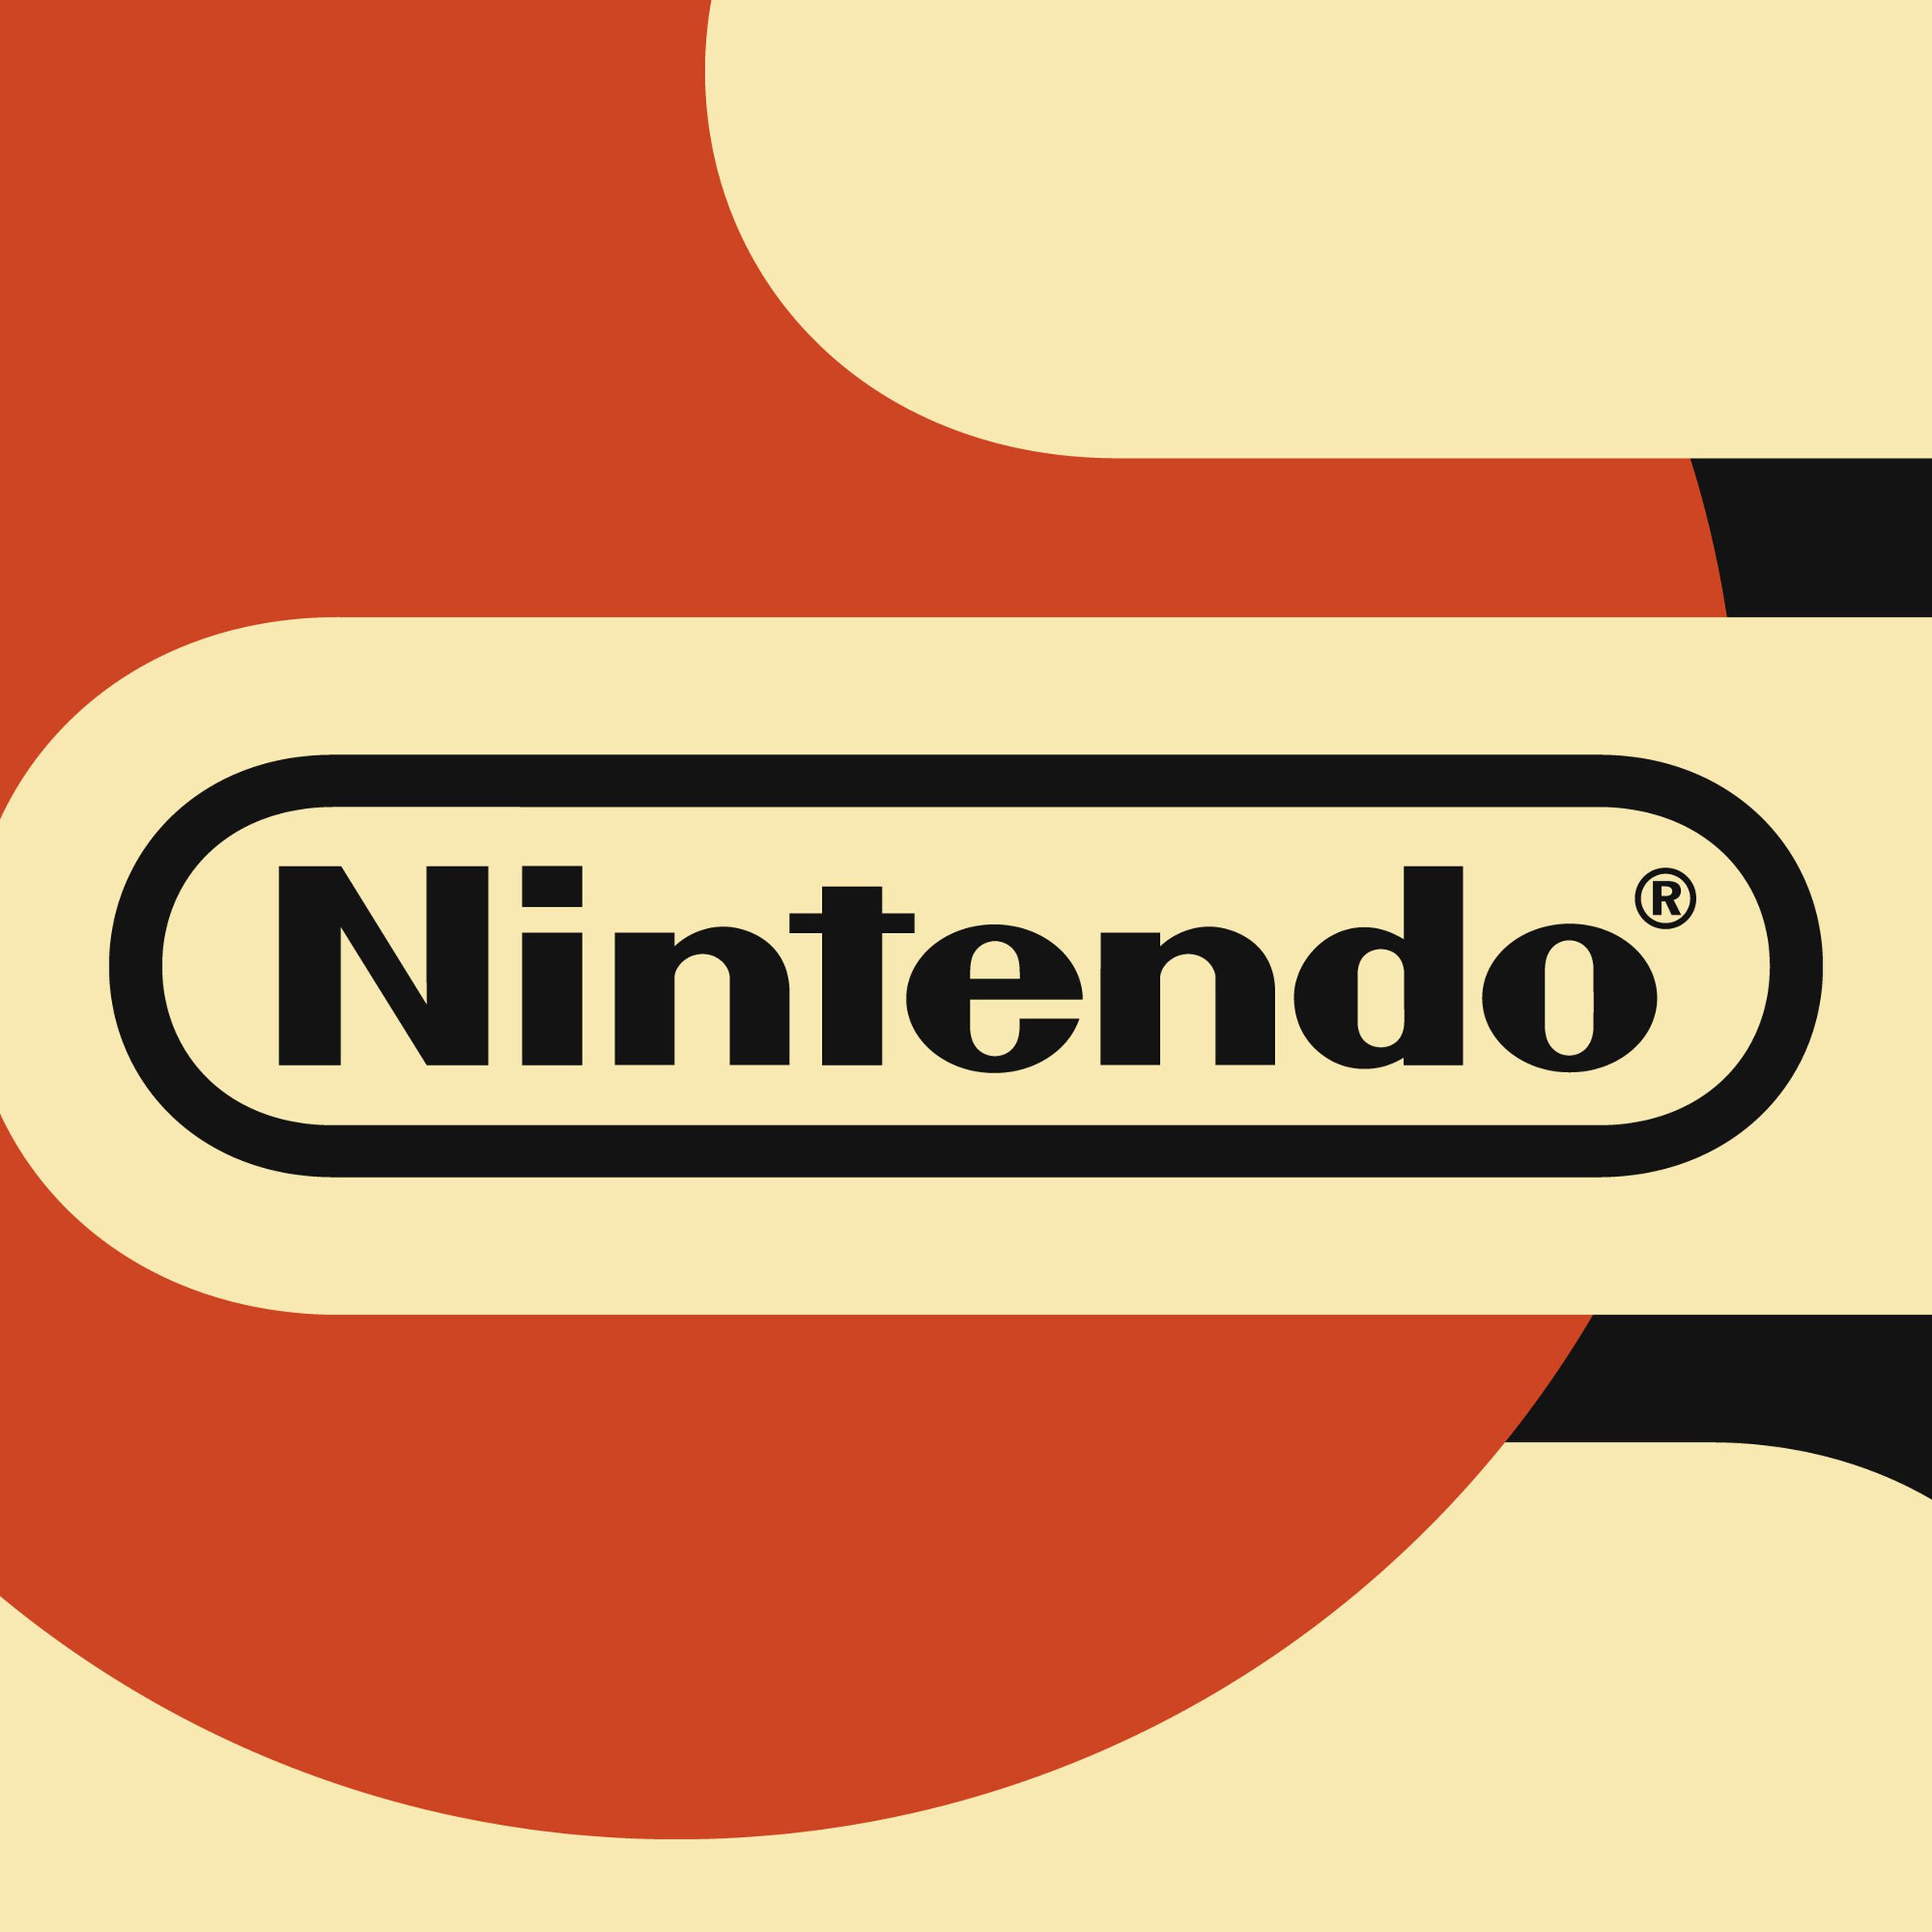 The Nintendo logo sits inside a black, red, and cream-colored design.